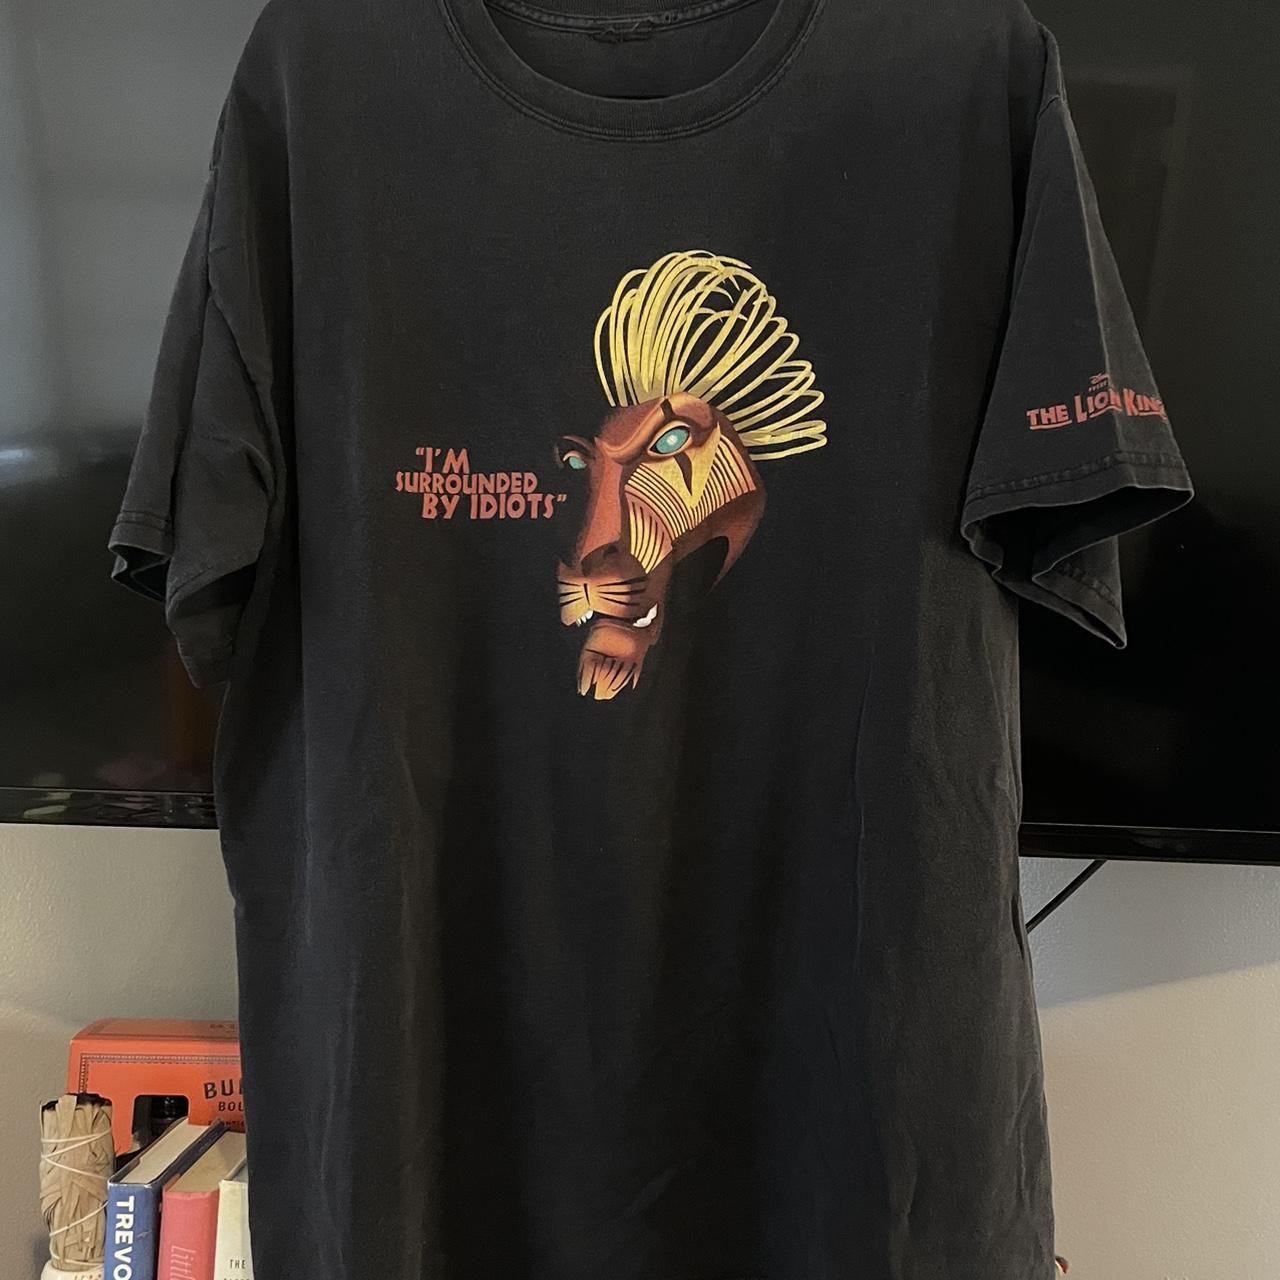 Scar - I'm Surrounded By Idiots, The Lion King T-Shirt